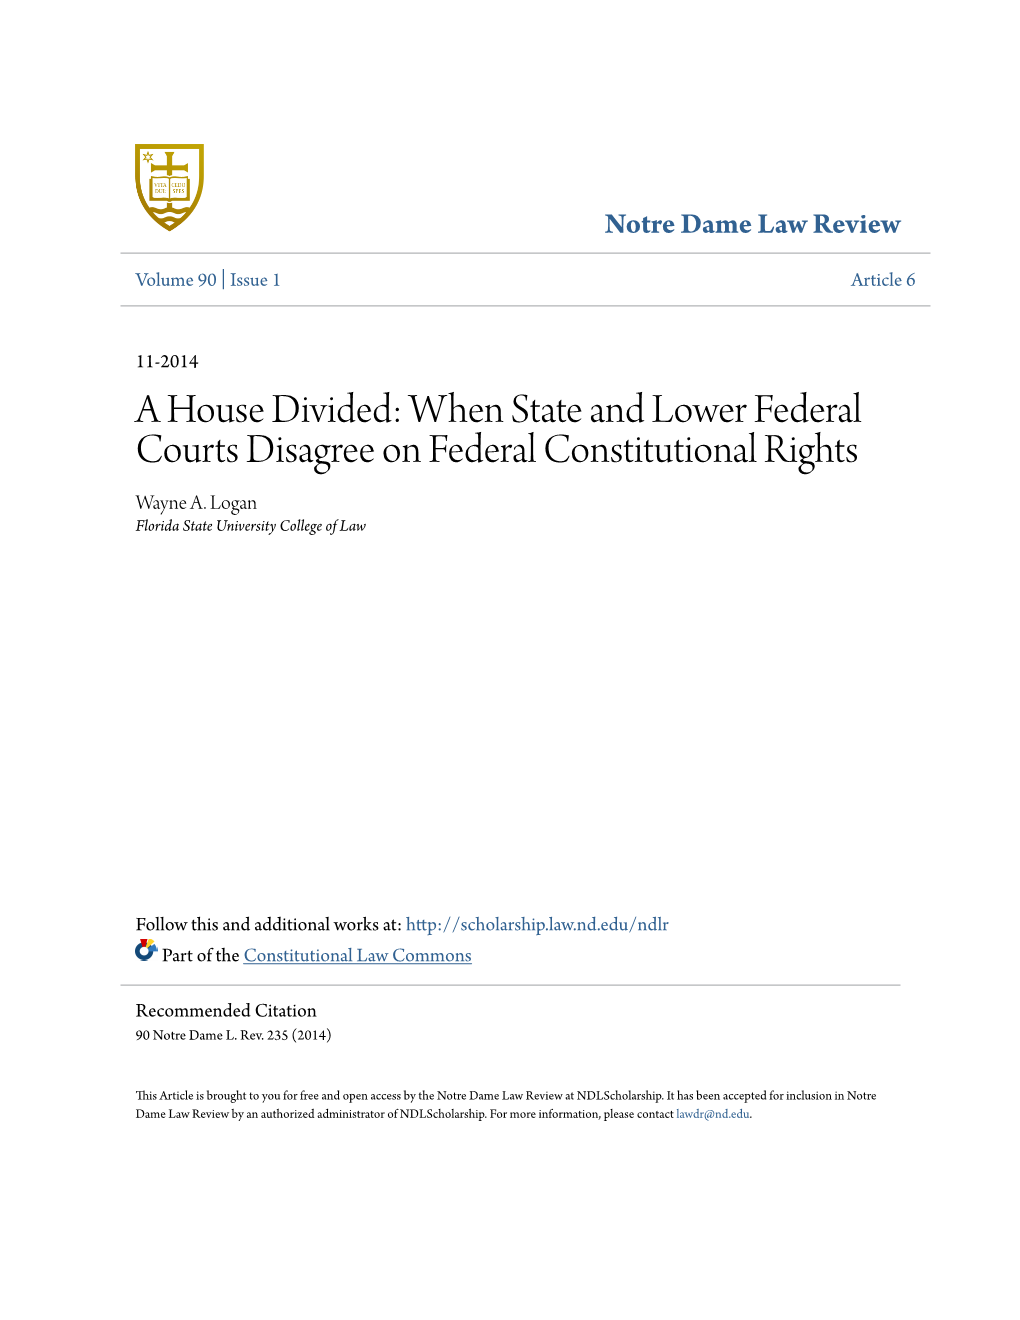 A House Divided: When State and Lower Federal Courts Disagree on Federal Constitutional Rights Wayne A